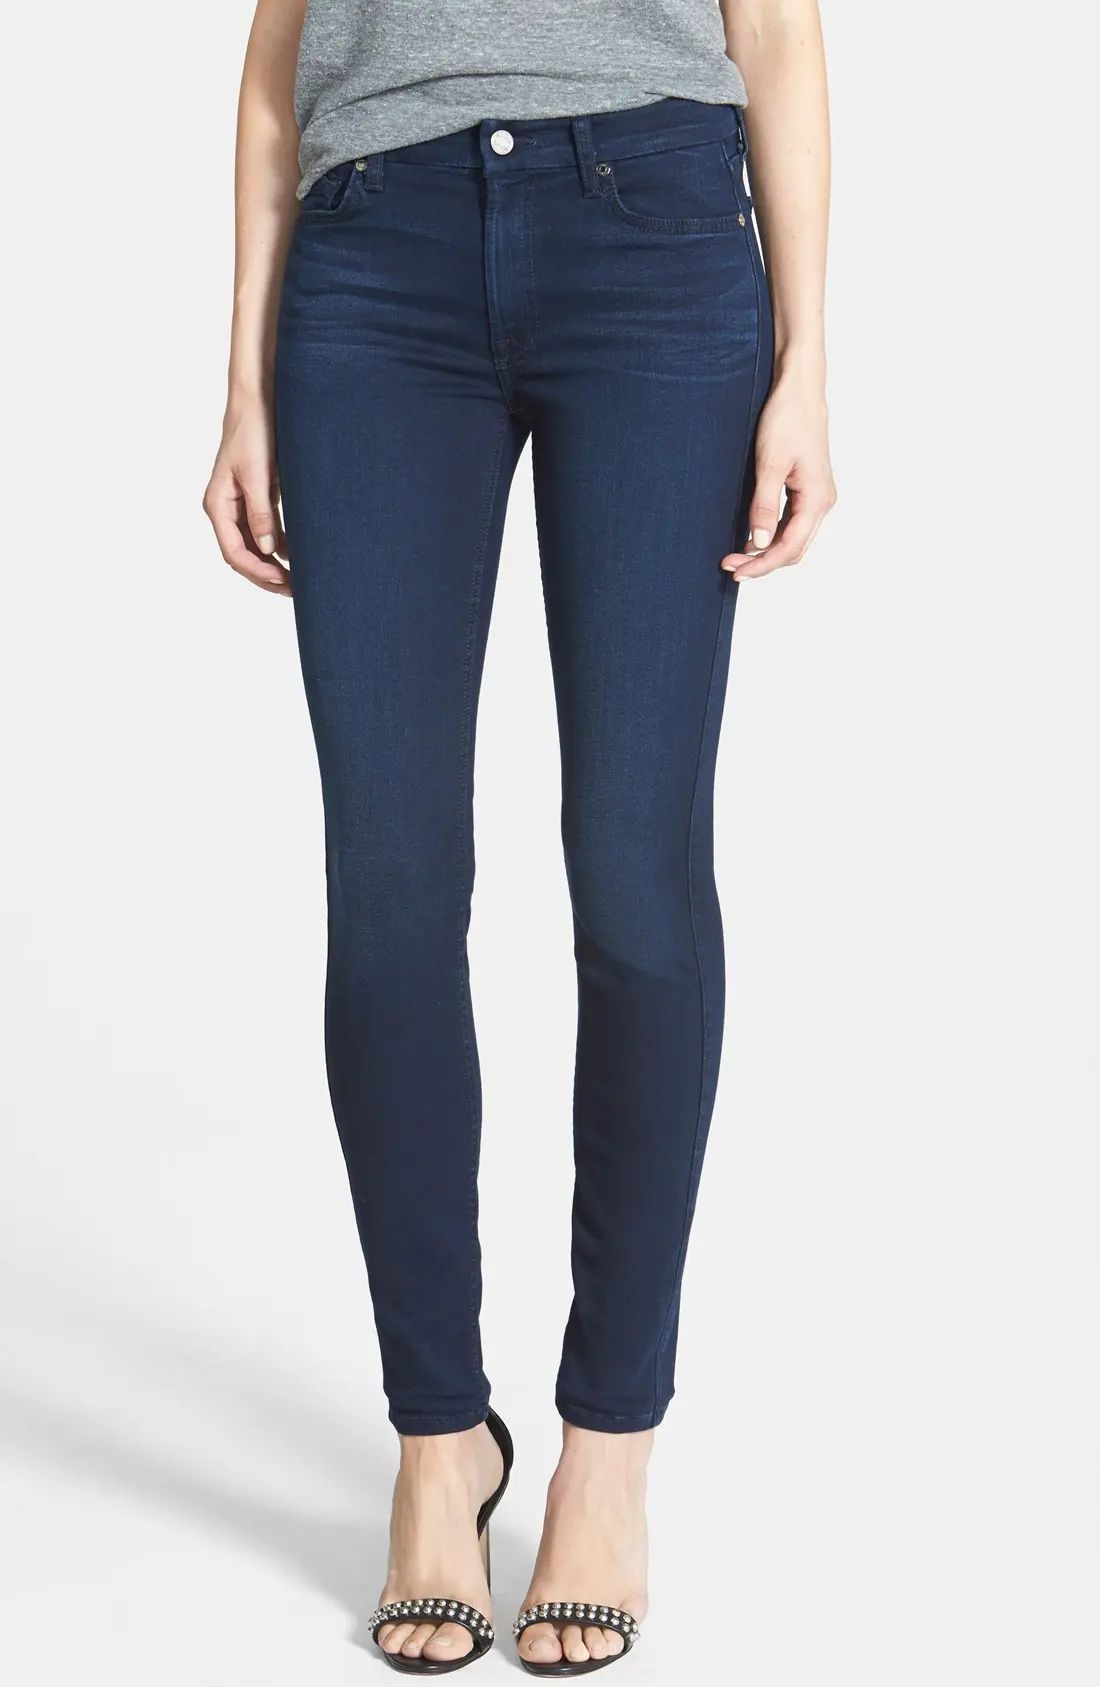 'Slim Illusion Luxe' Mid Rise Skinny Jeans | Nordstrom